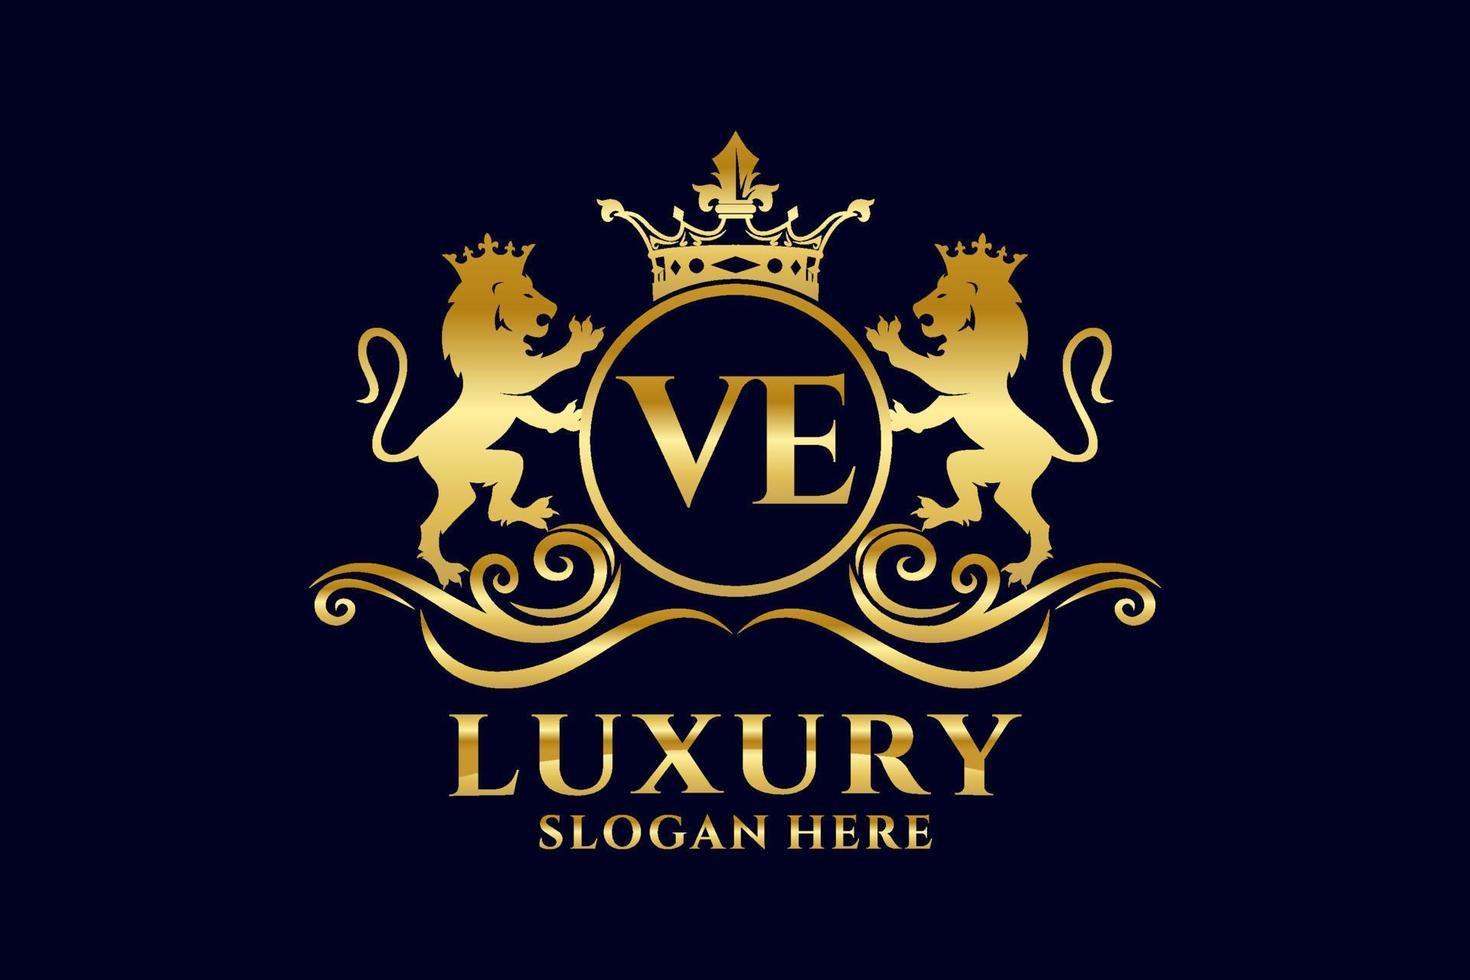 Initial VE Letter Lion Royal Luxury Logo template in vector art for luxurious branding projects and other vector illustration.